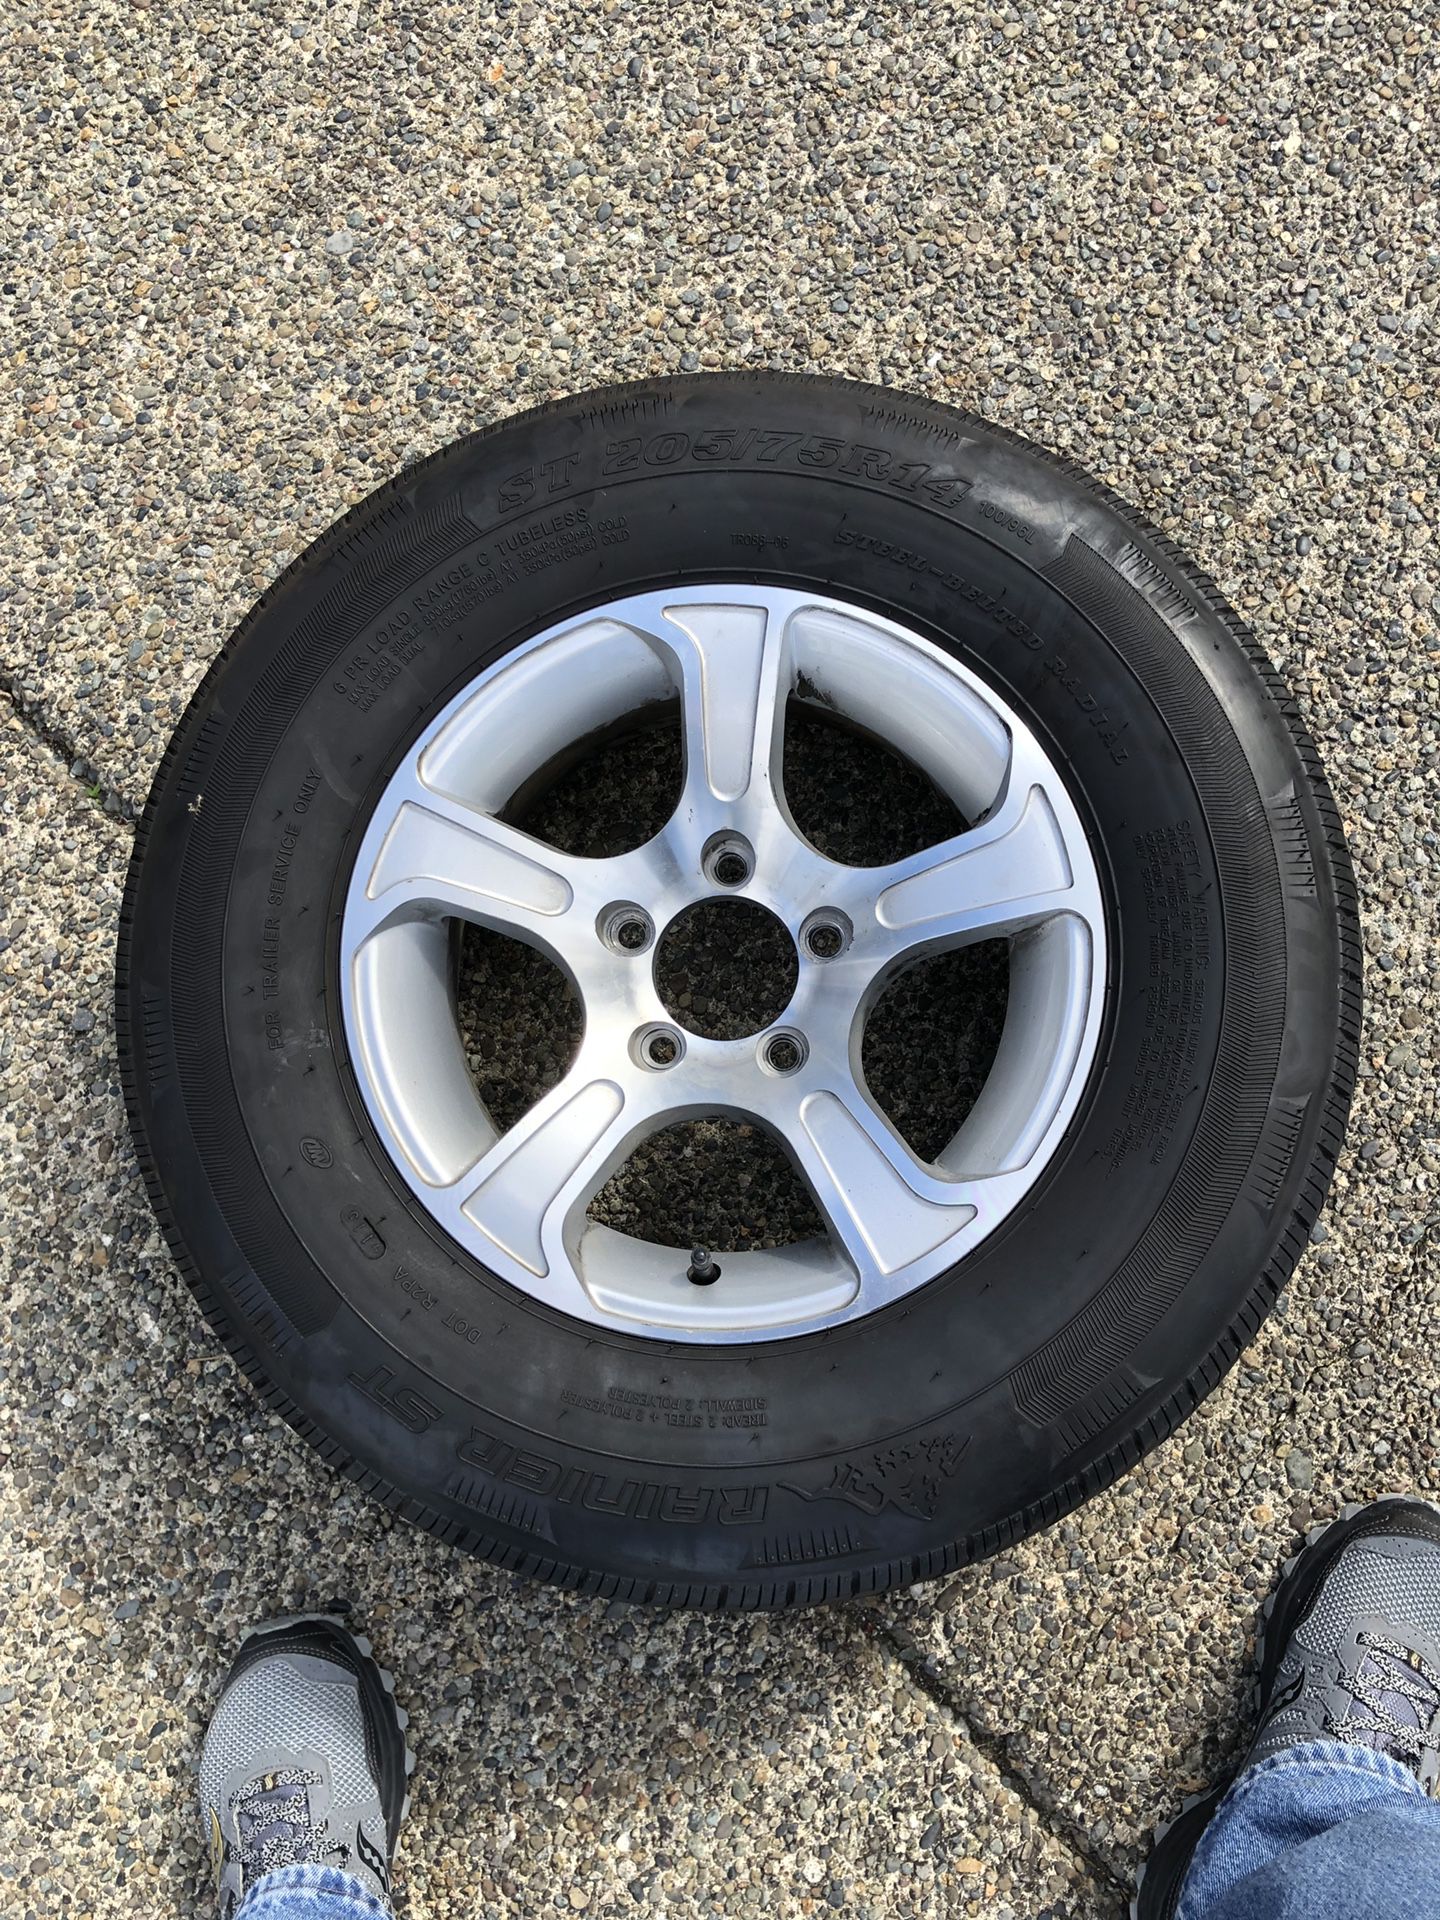 14inch travel trailer tire and rim